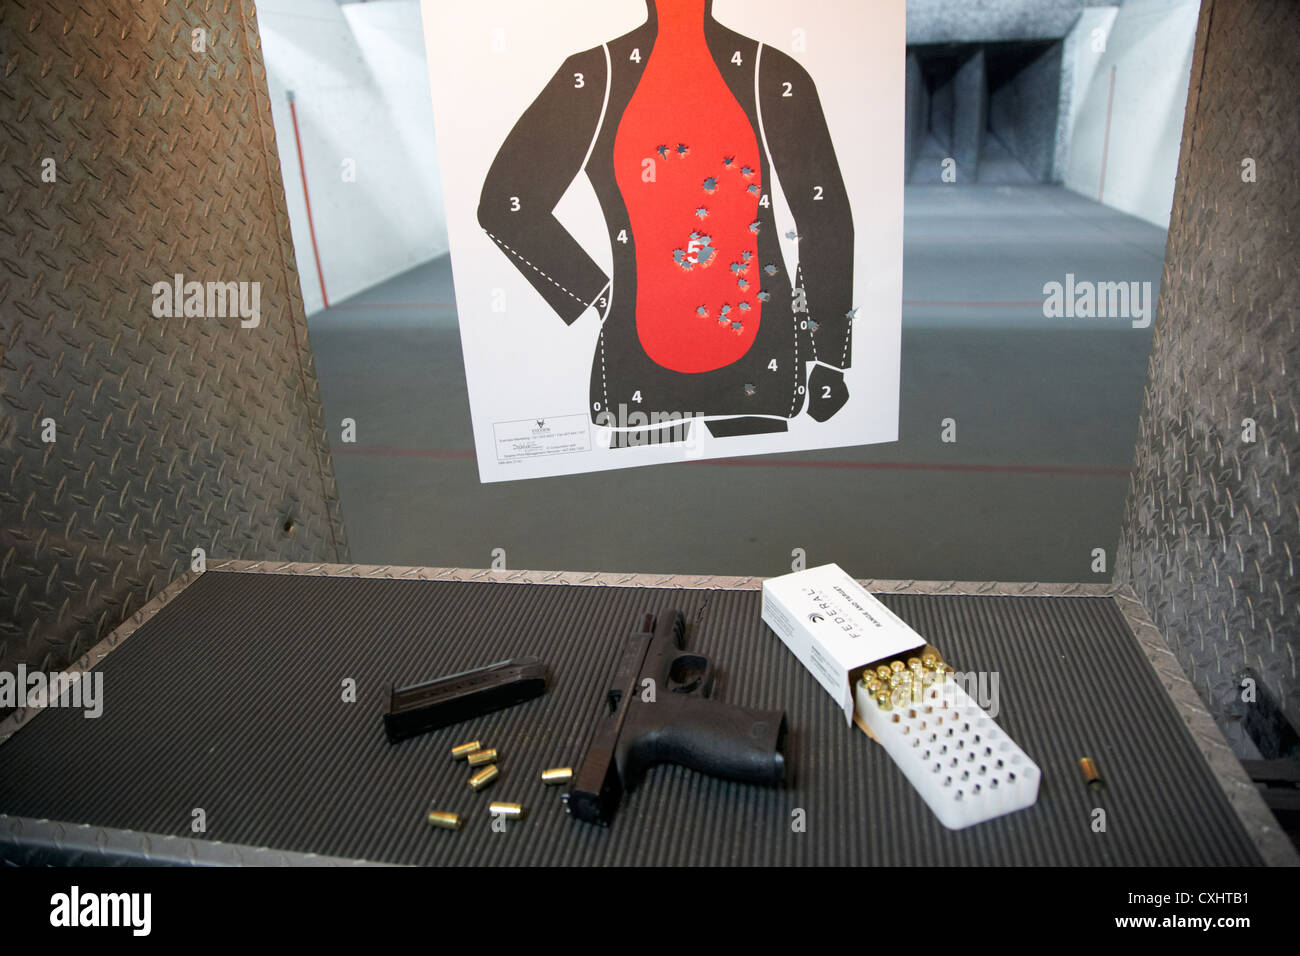 smith and wesson 9mm handgun with ammunition and holes in a human shaped target during firearms training at a gun range in florida usa concealed carry Stock Photo